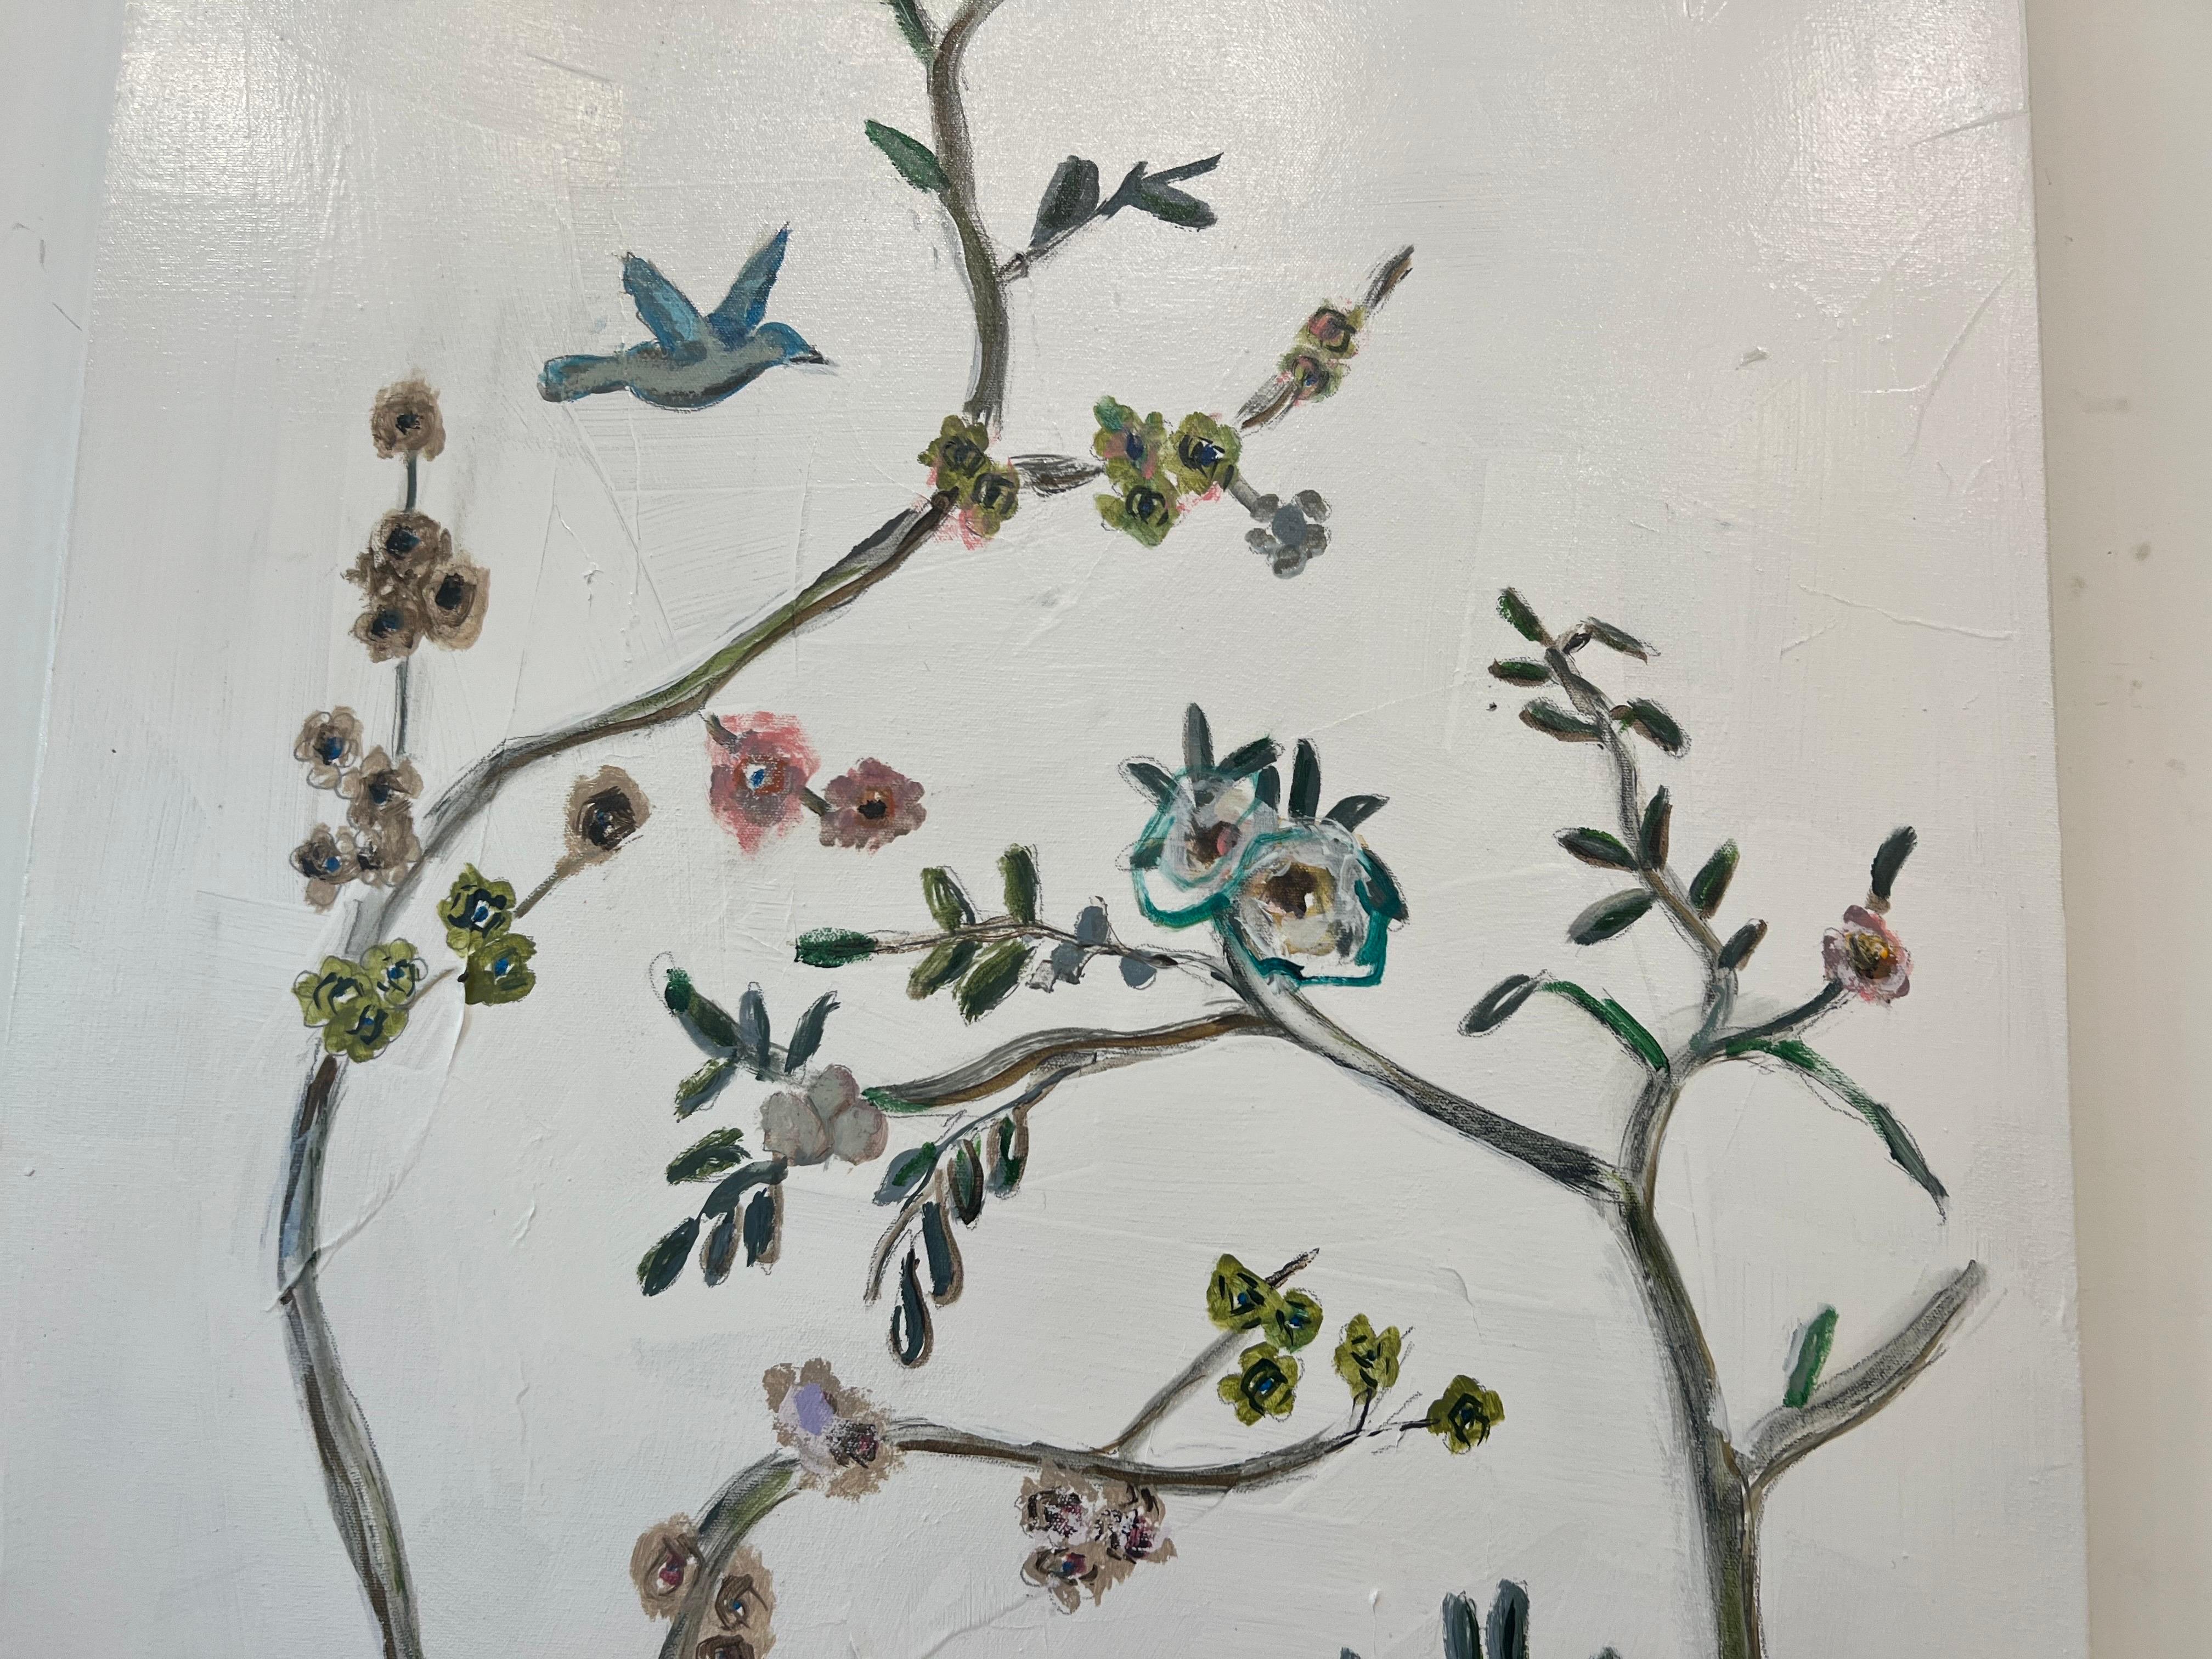 Garden Birds and Butterflies 3 by Sarah Robertson, Mixed Media Floral Painting 5